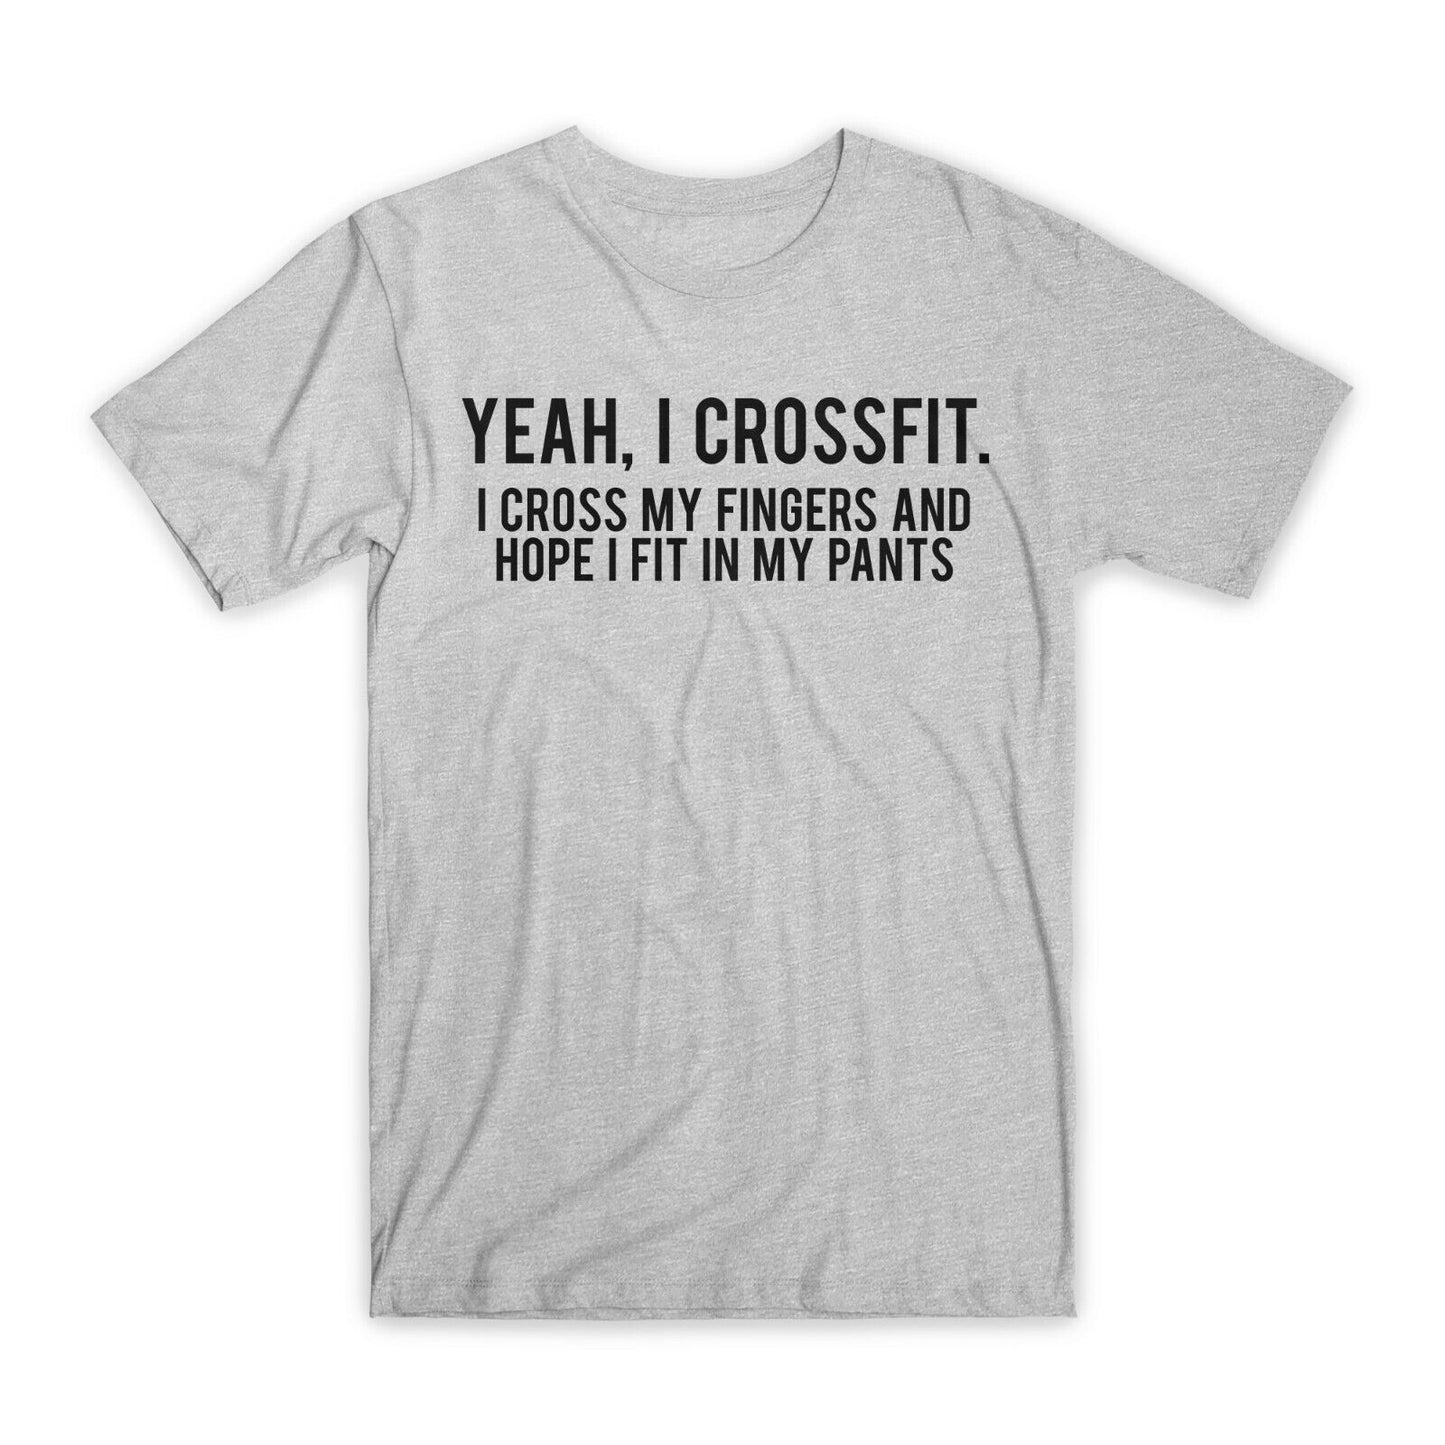 Yeah I Crossfit T-Shirt Premium Soft Cotton Crew Neck Funny Tee Novelty Gift NEW